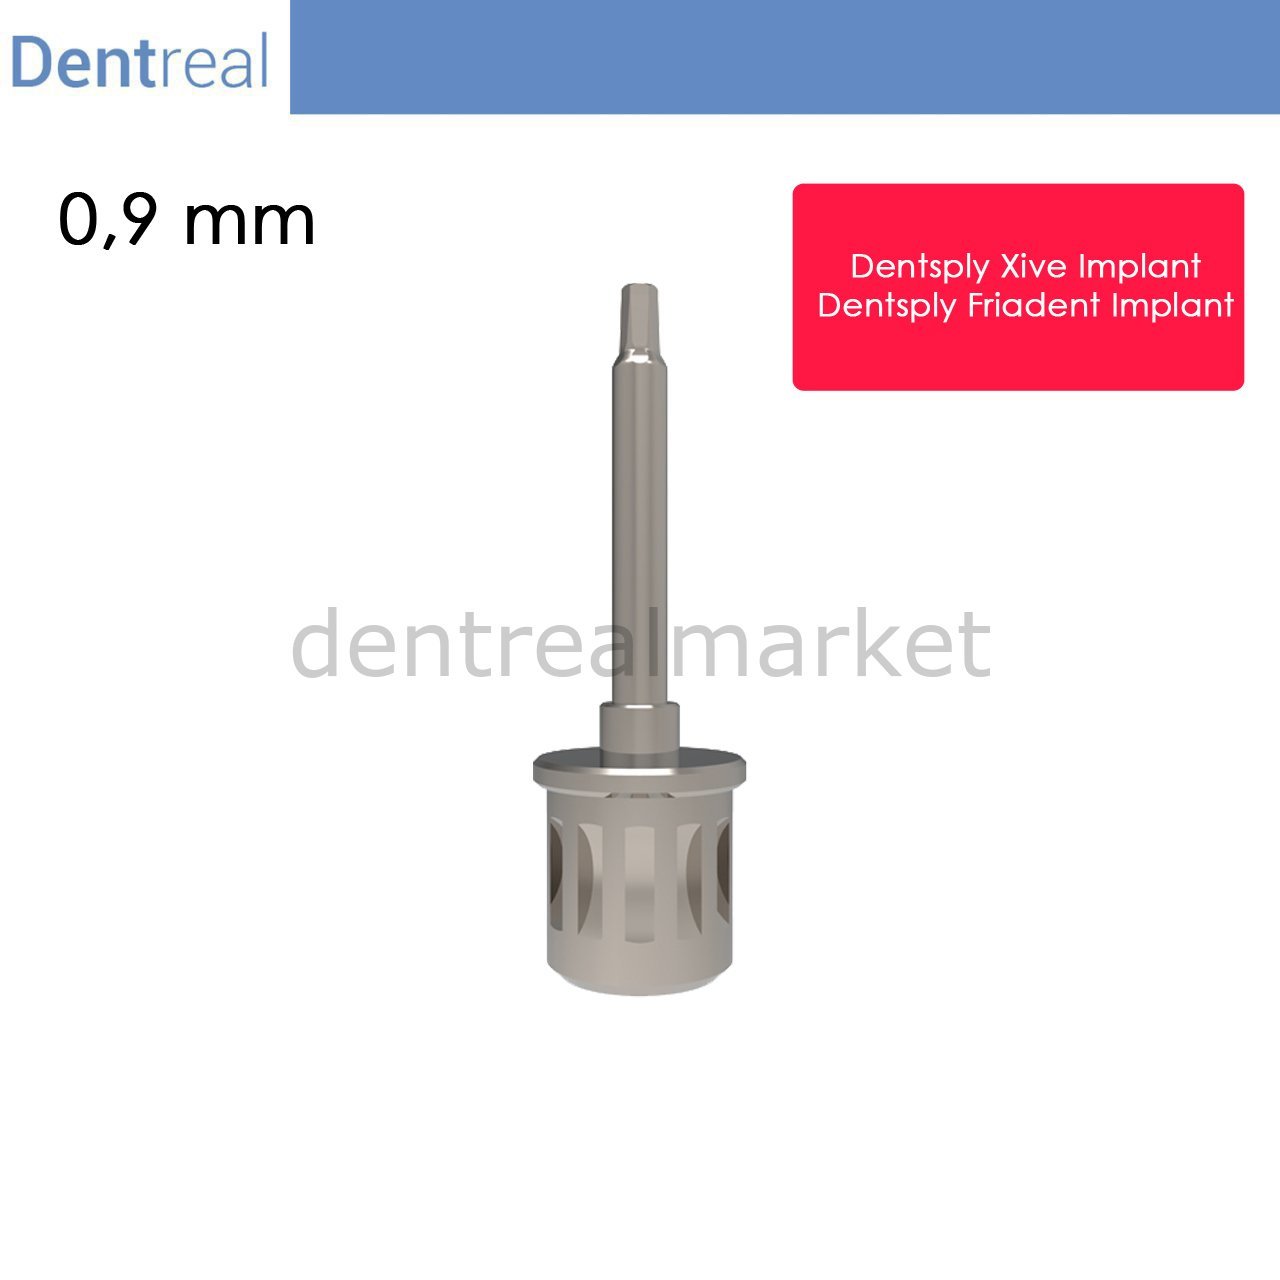 DentrealStore - Dentreal Screwdriver for Xive Implant - 0,9 mm Hex Driver